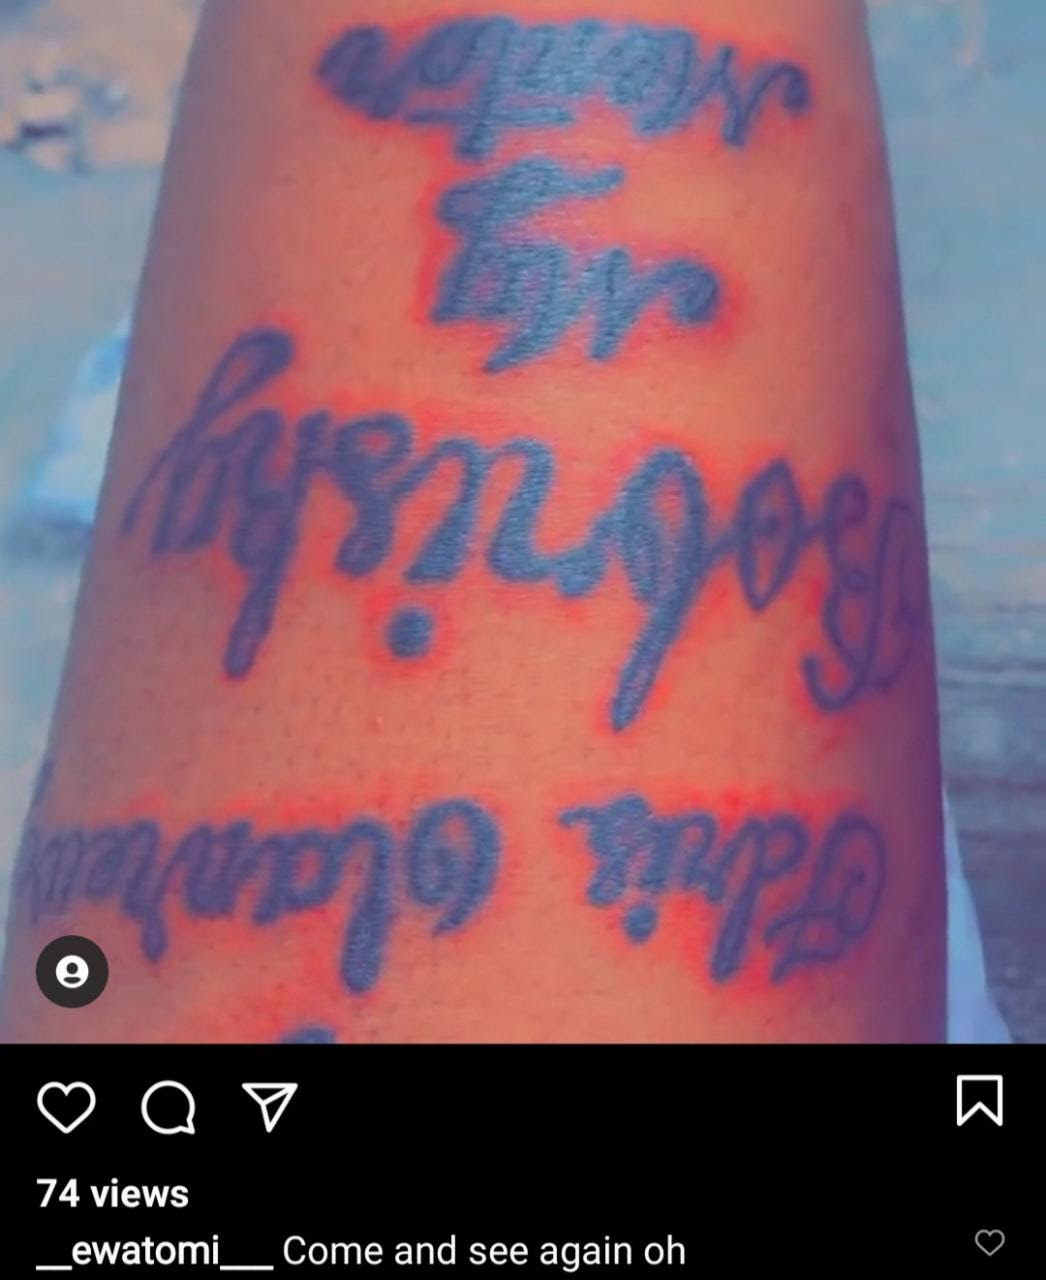 More fans get tattoo of Bobrisky, pushing the number to over a dozen (photos)